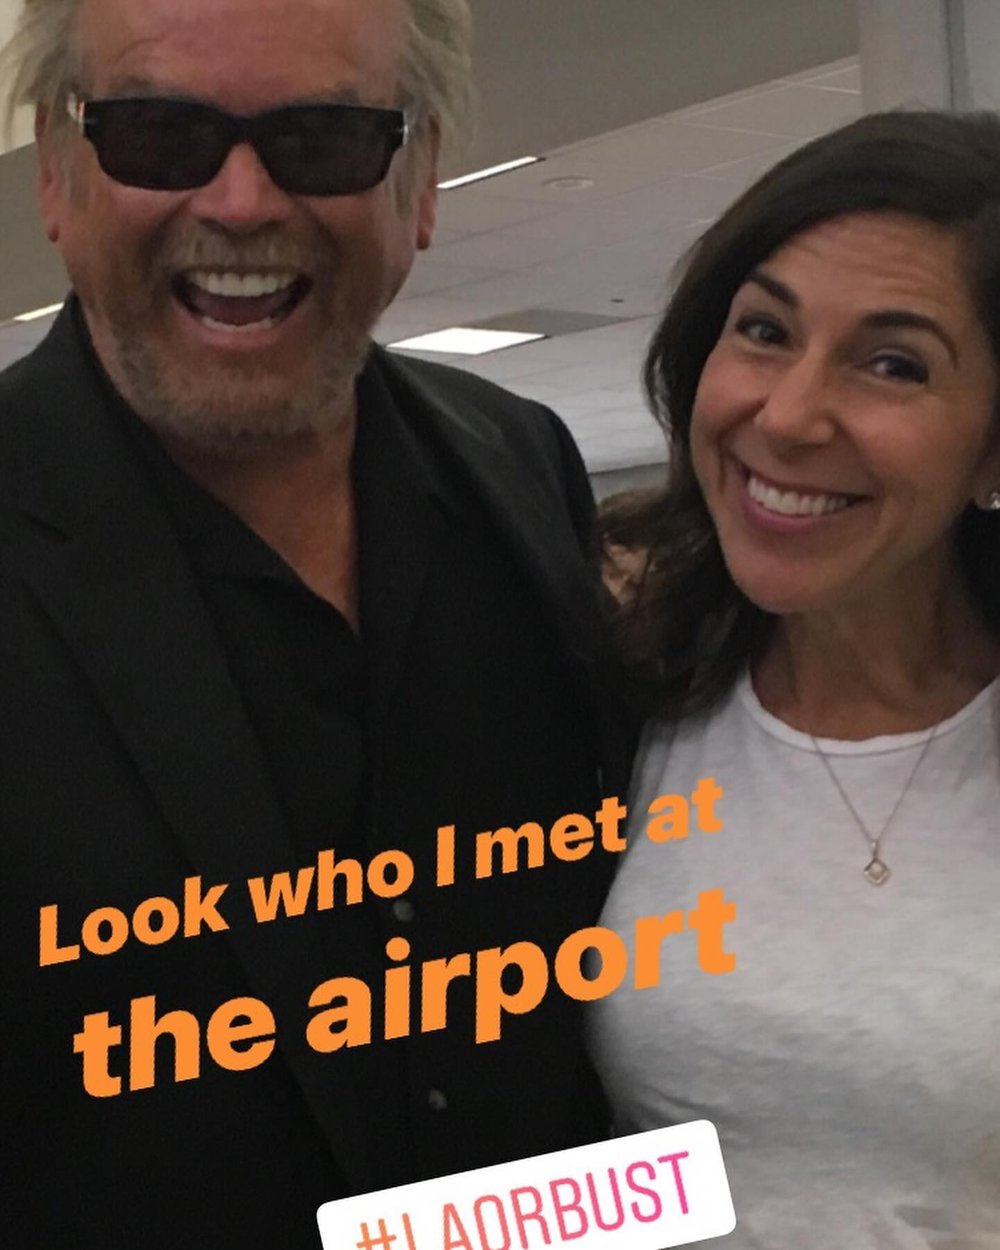 Happy 87th Jack Nicholson! 🎉Apologies if you&rsquo;ve heard this story before, but here it is in honor of the iconic actor &hellip; 

One time at Newark Liberty Int&rsquo;l Airport I saw &hellip; Jack Nicholson?!? &hellip; waiting to board a plane t